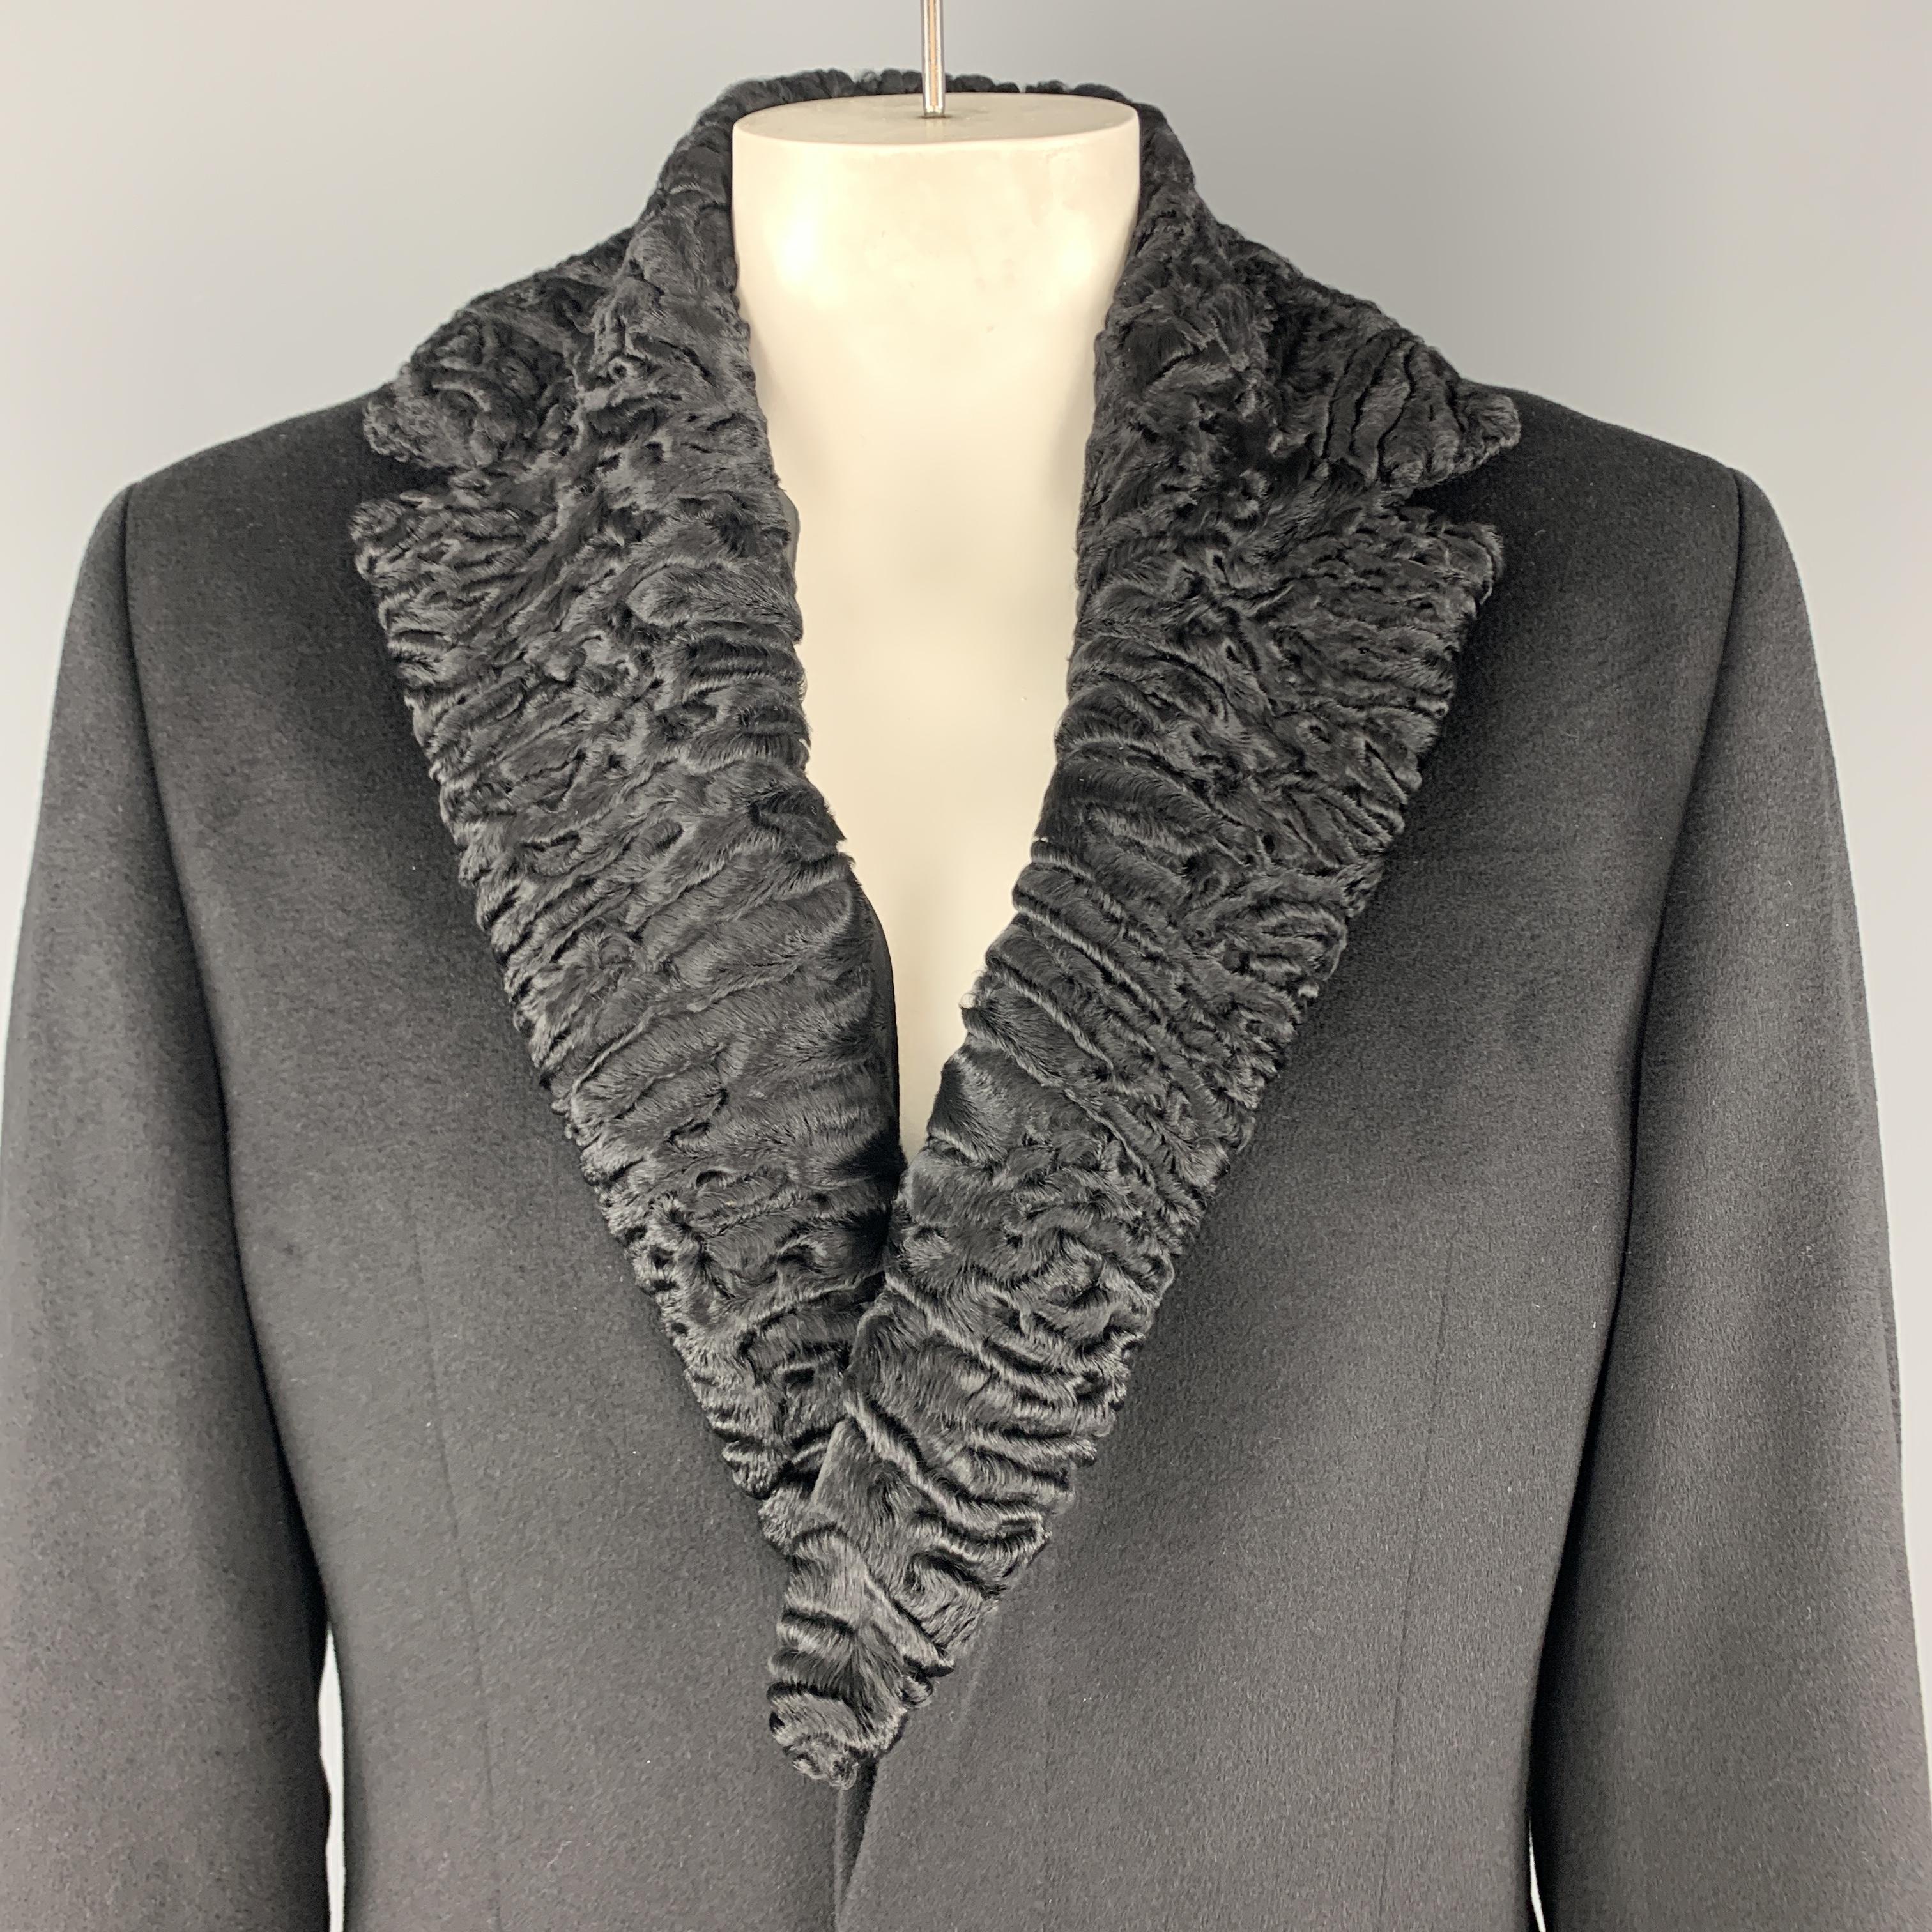 HUGO BOSS coat comes in black wool blend with a hidden placket button front, and notch lapel, with detachable fur collar. 

Excellent Pre-Owned Condition.
Marked: 42

Measurements:

Shoulder: 19 in.
Chest: 46 in.
Sleeve: 26 in.
Length: 41 in.